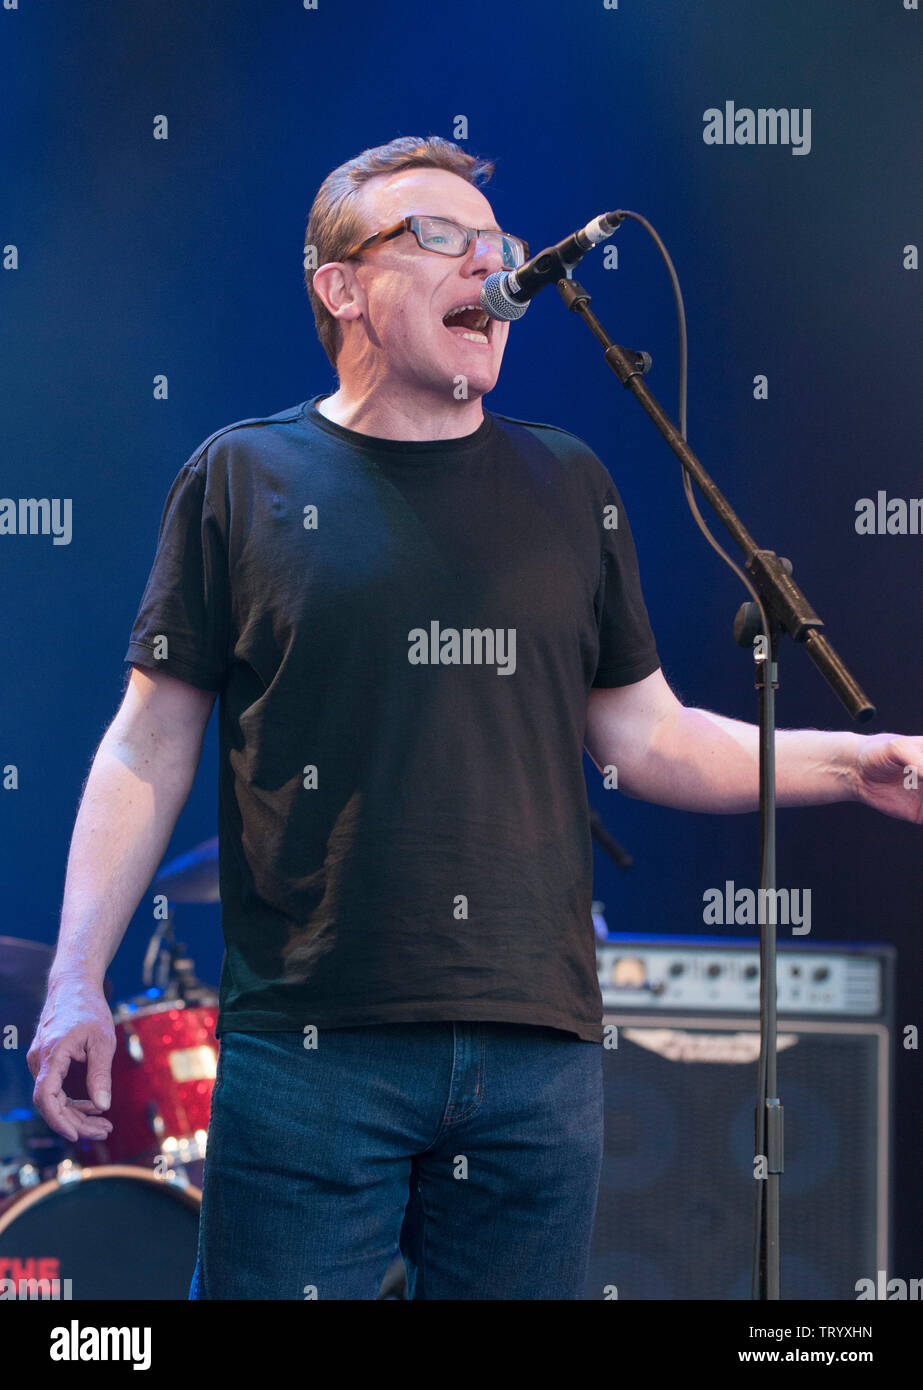 Craig Reid of The Proclaimers performing at the Cornbury festival, Great Tew, Oxfordshire, UK. July 6, 2013 Stock Photo